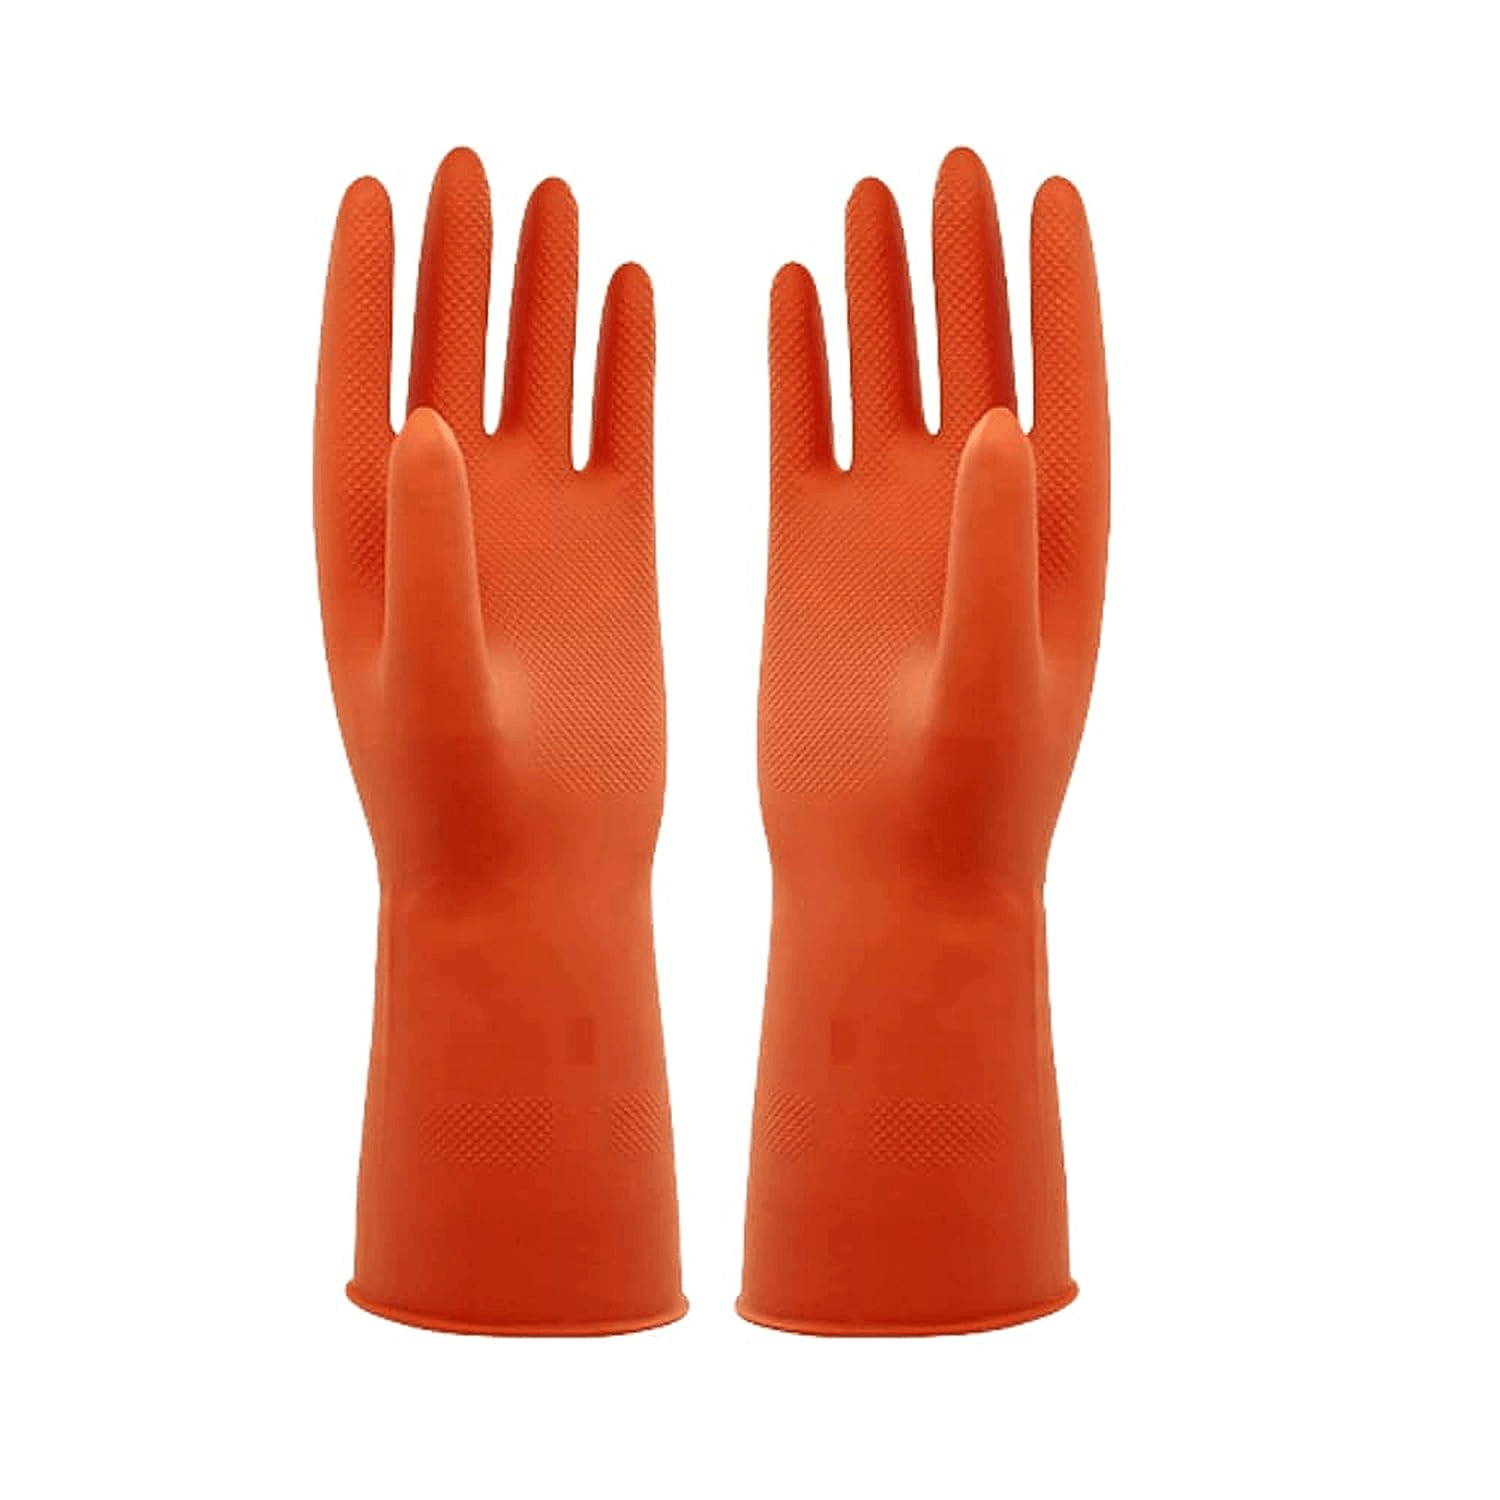 robustt-heavy-duty-rubber-hand-gloves-for-dishwashing-gardening-kitchen-cleaning-pack-of-1